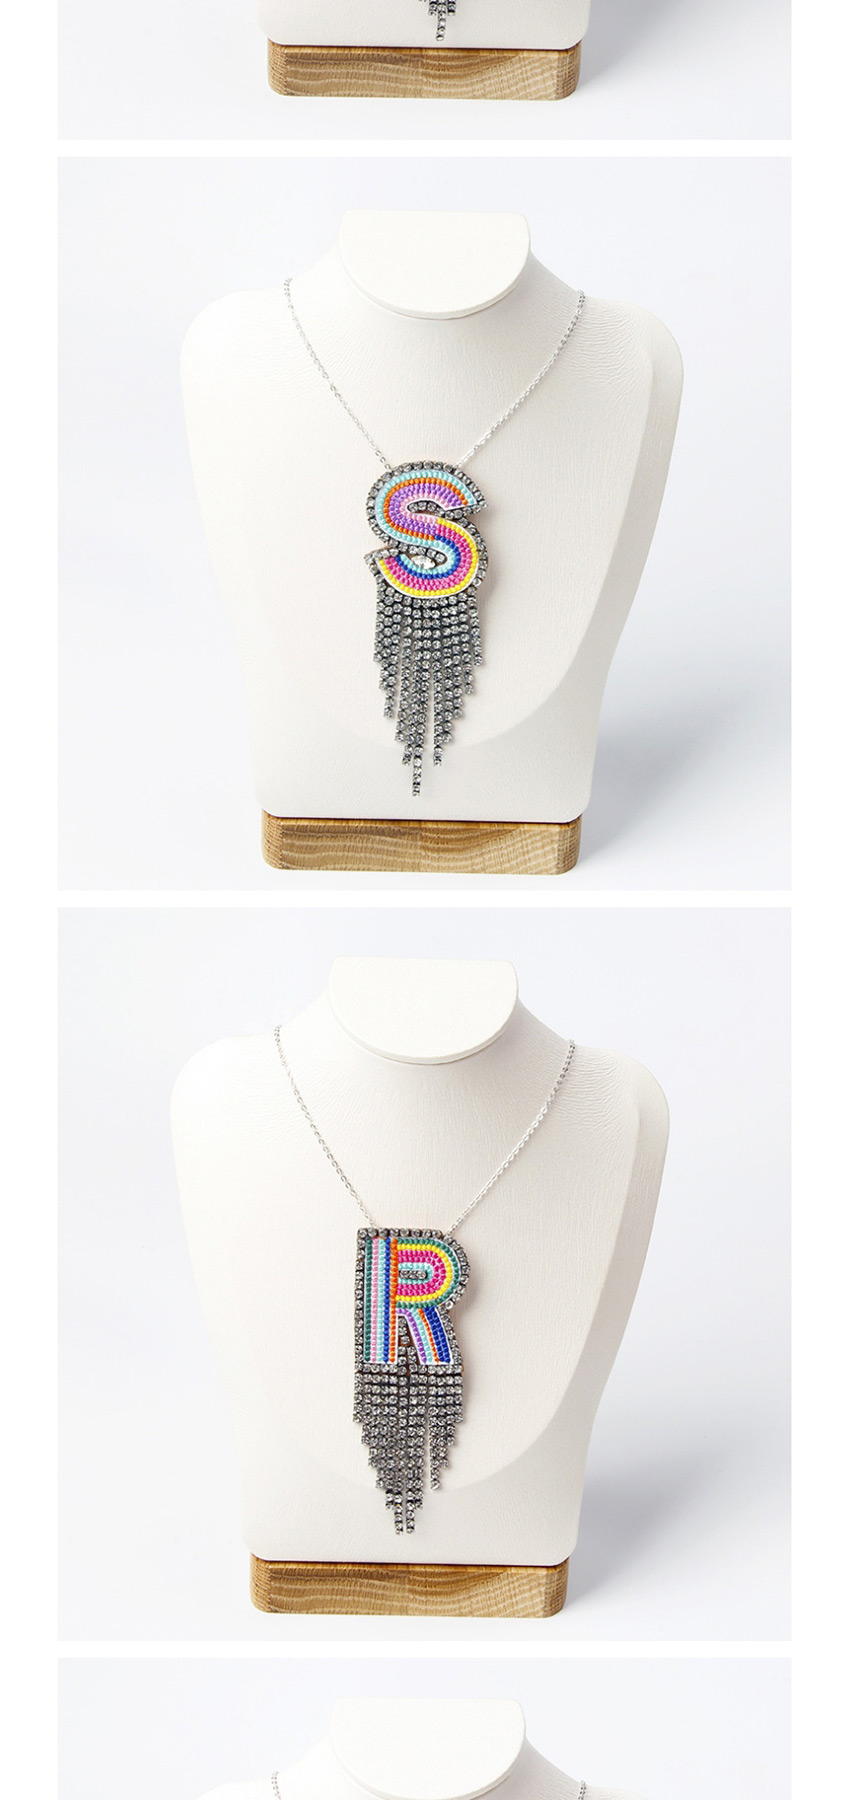 Fashion Jcolor Alphabet Mixed Color Embroidered Diamond And Fringe Necklace,Pendants